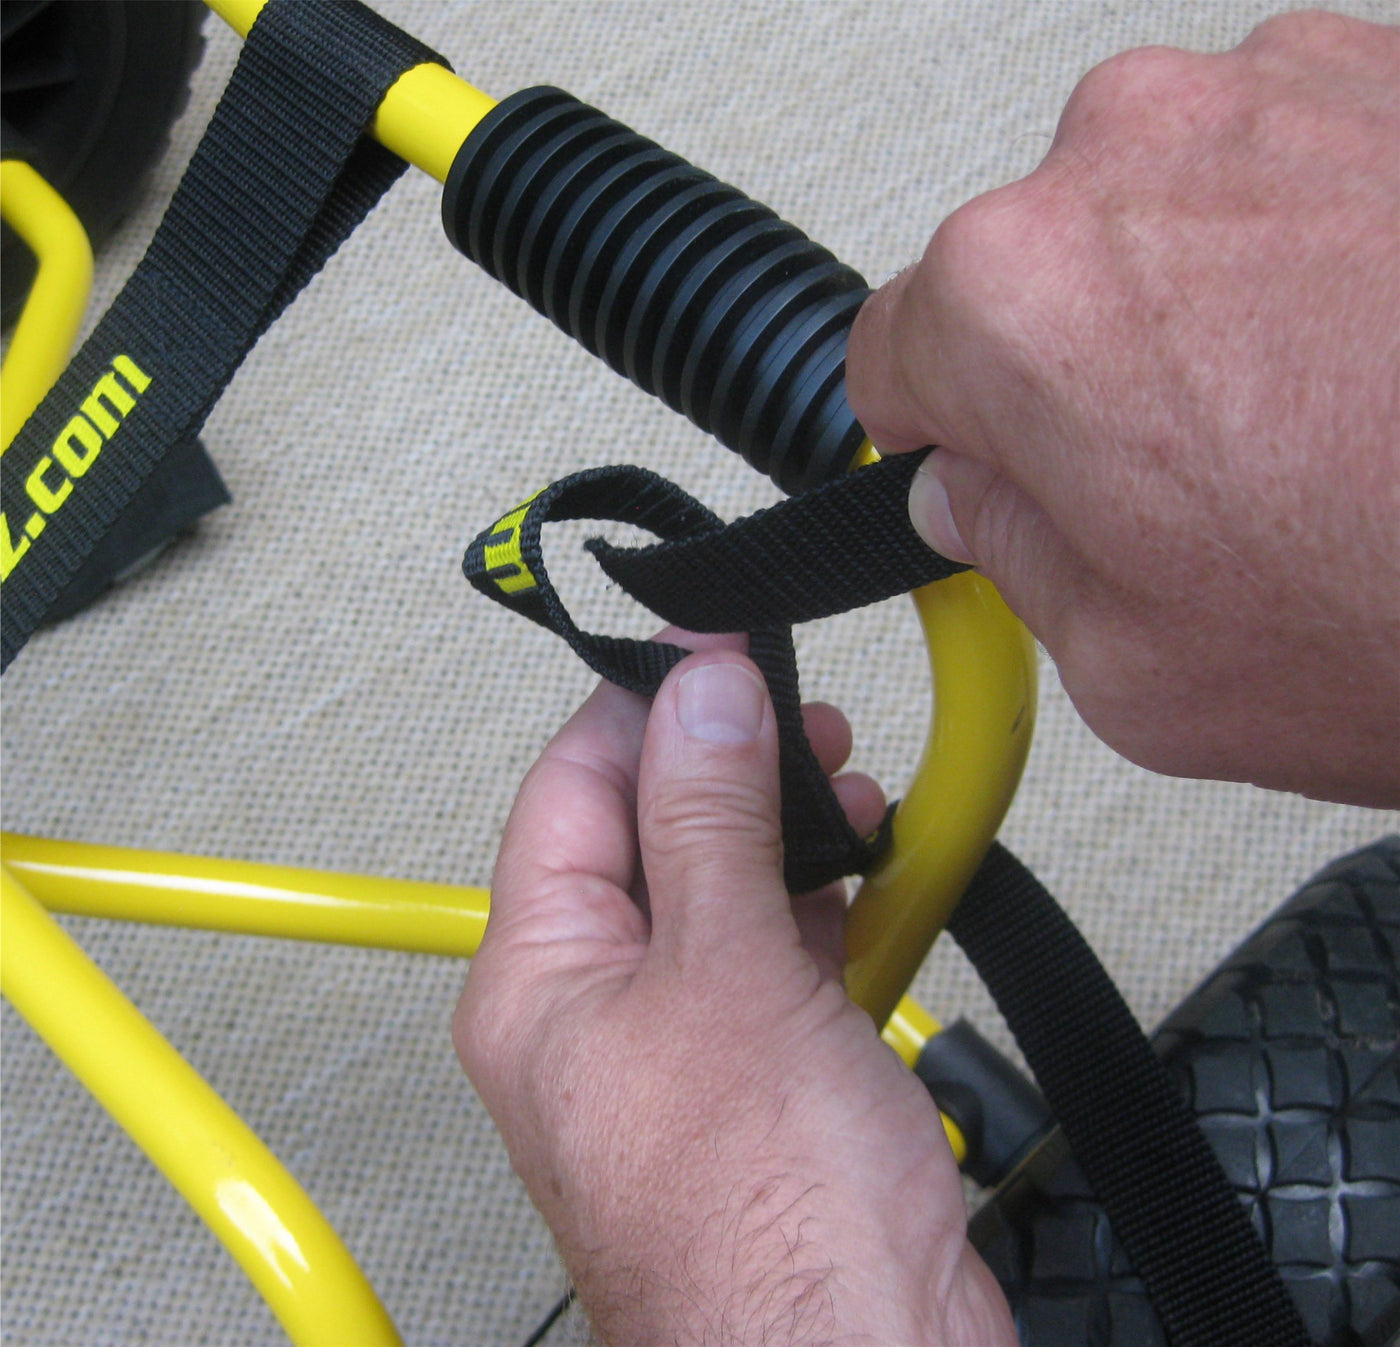 A person tying the straps on the dlx cart